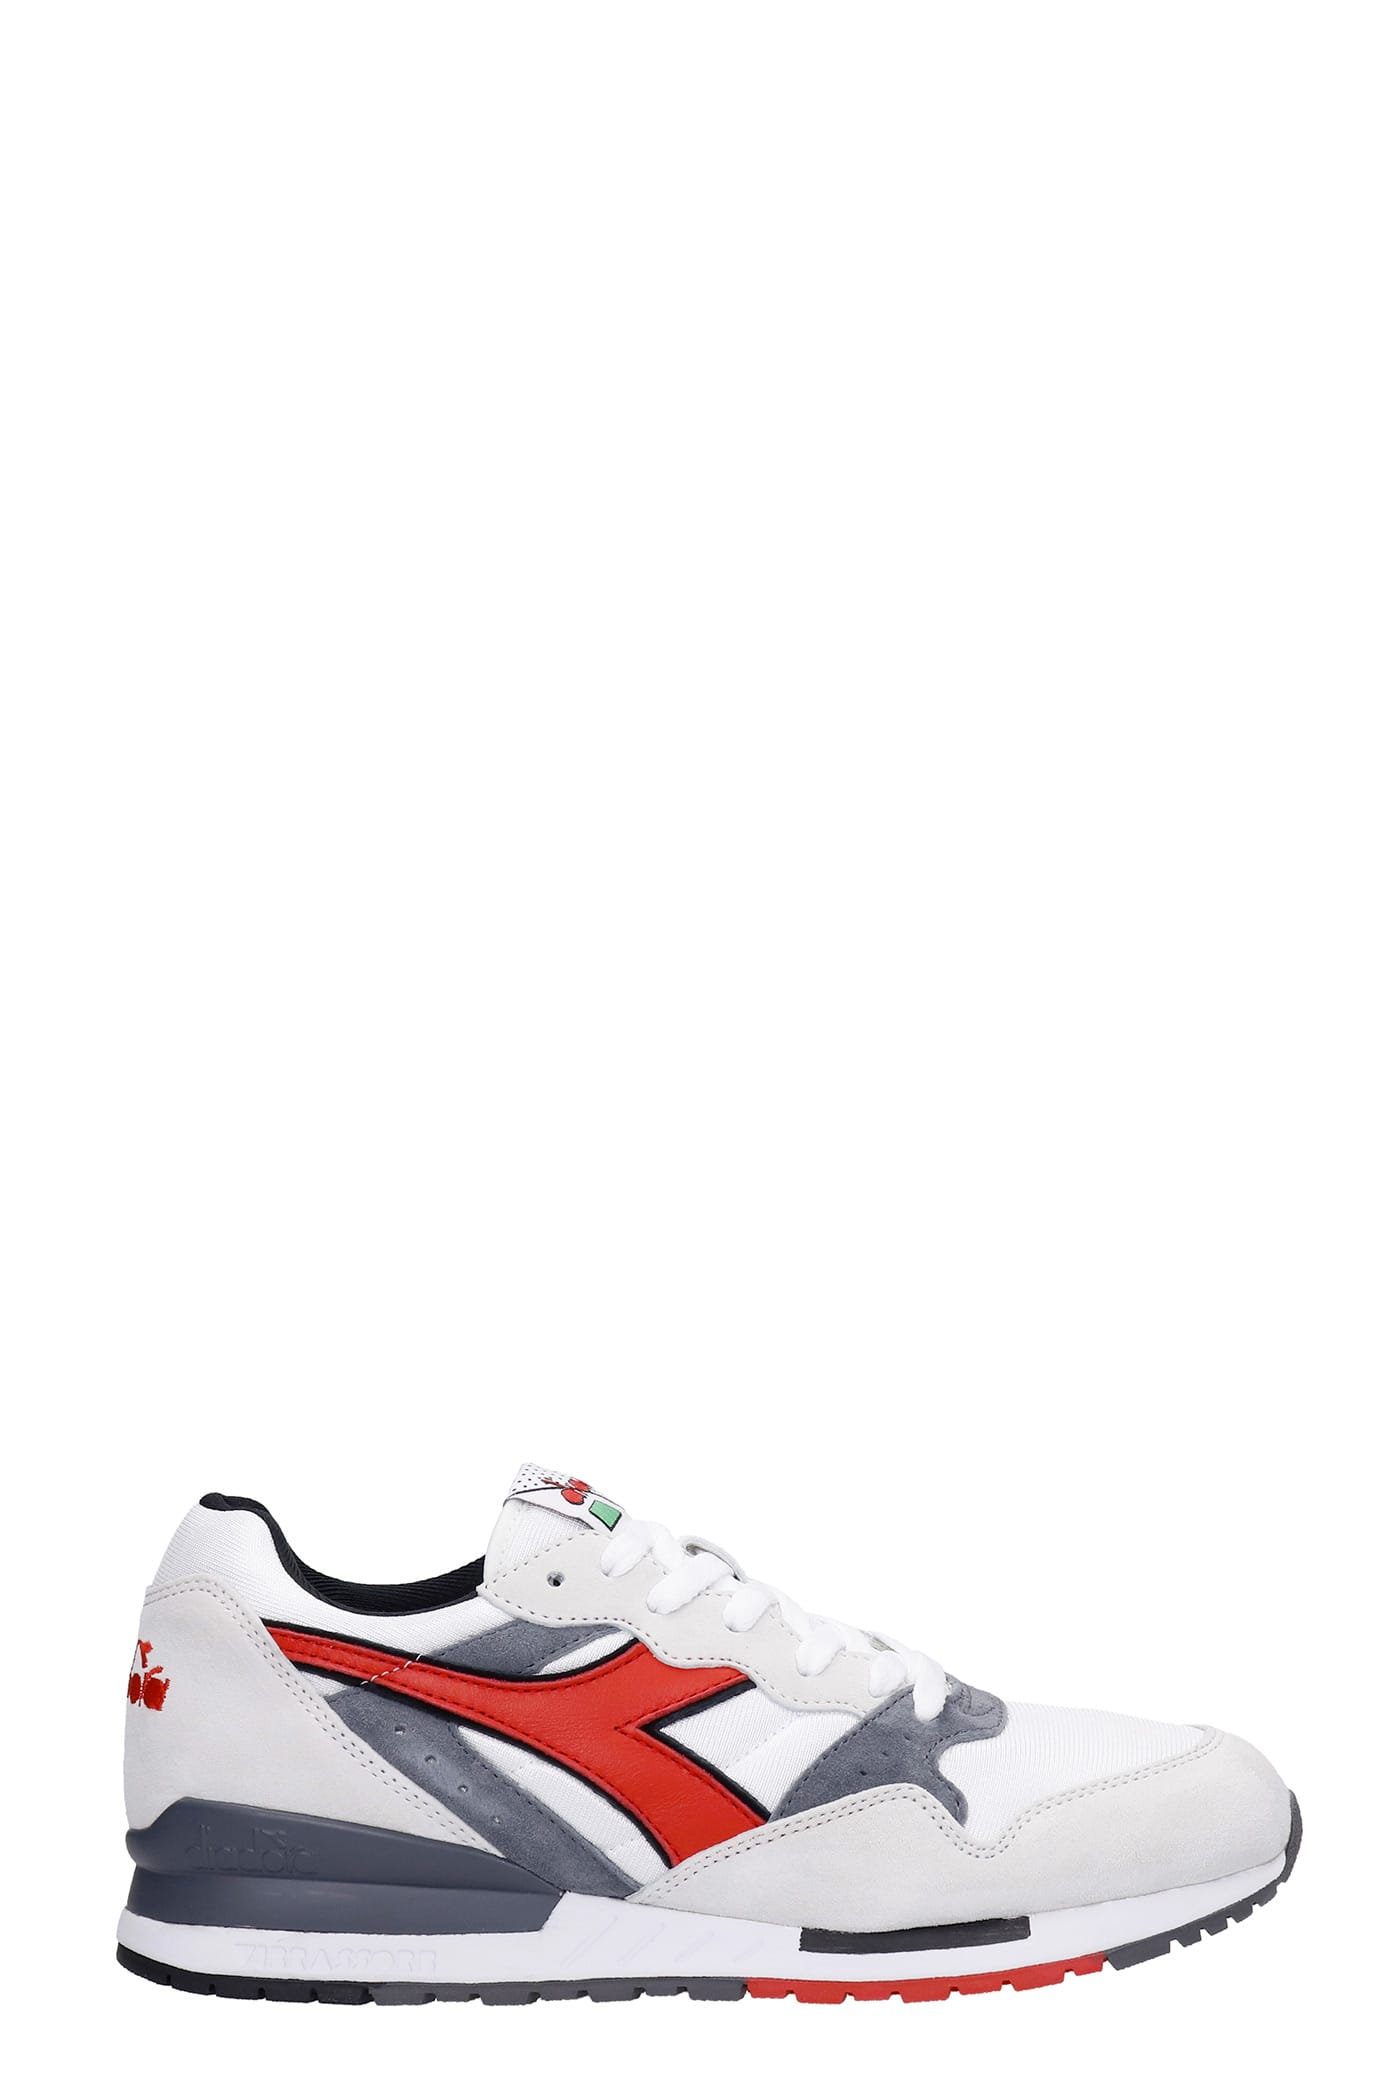 Diadora Intrepid Og Sneakers In White Suede And Fabric